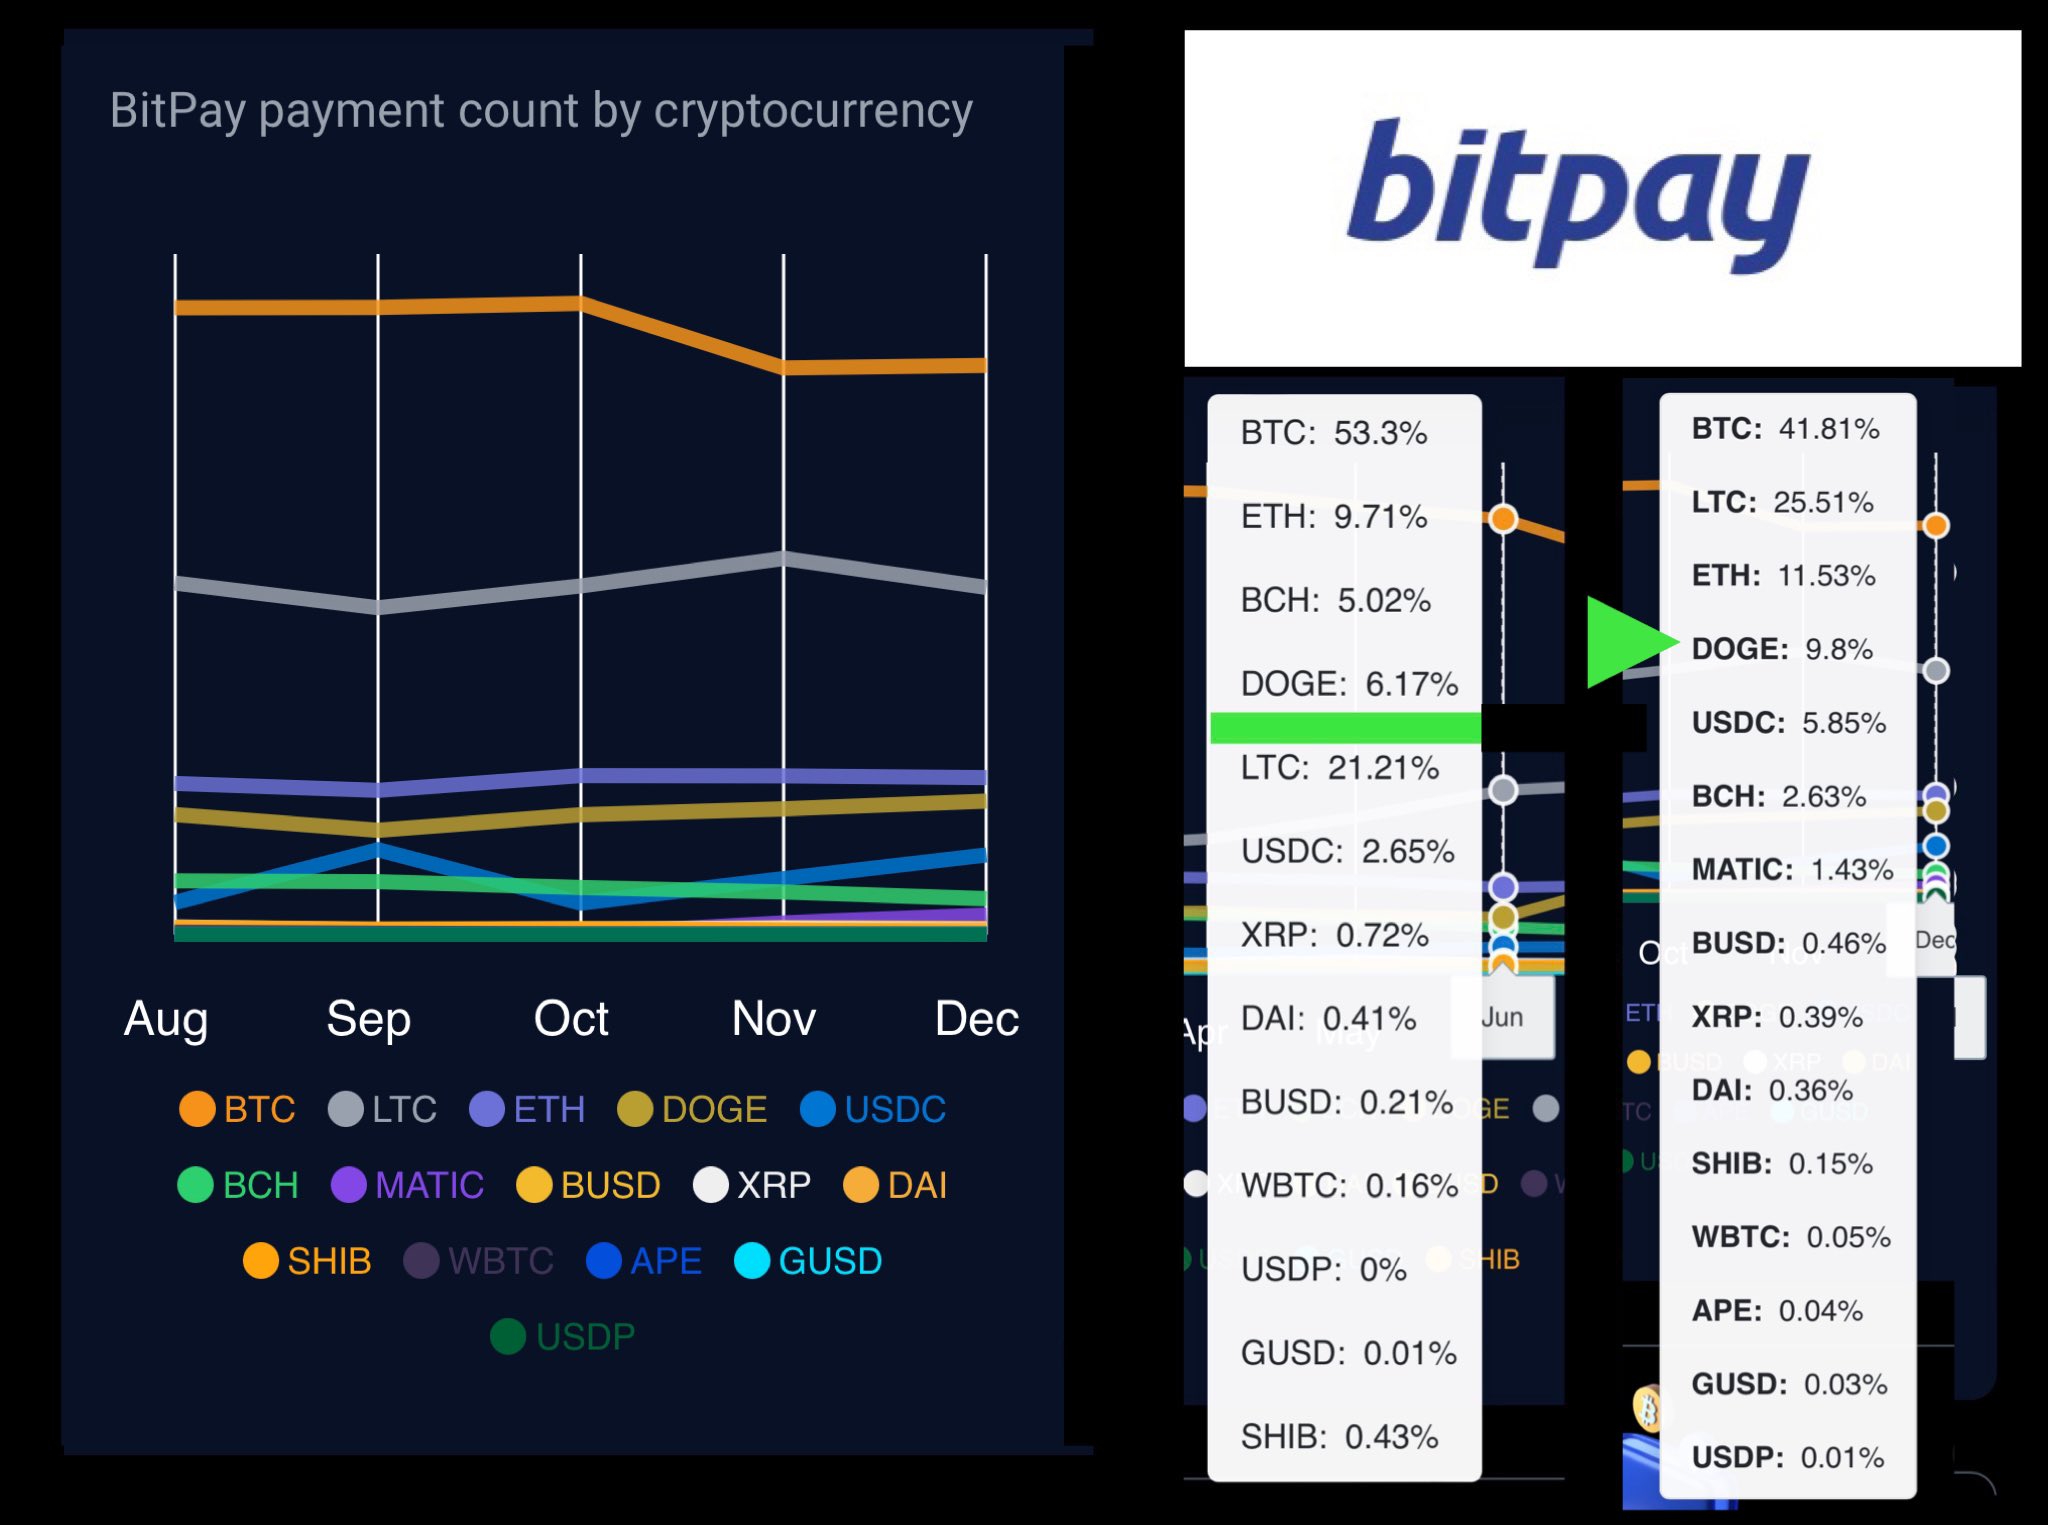 BitPay payment count by crypto